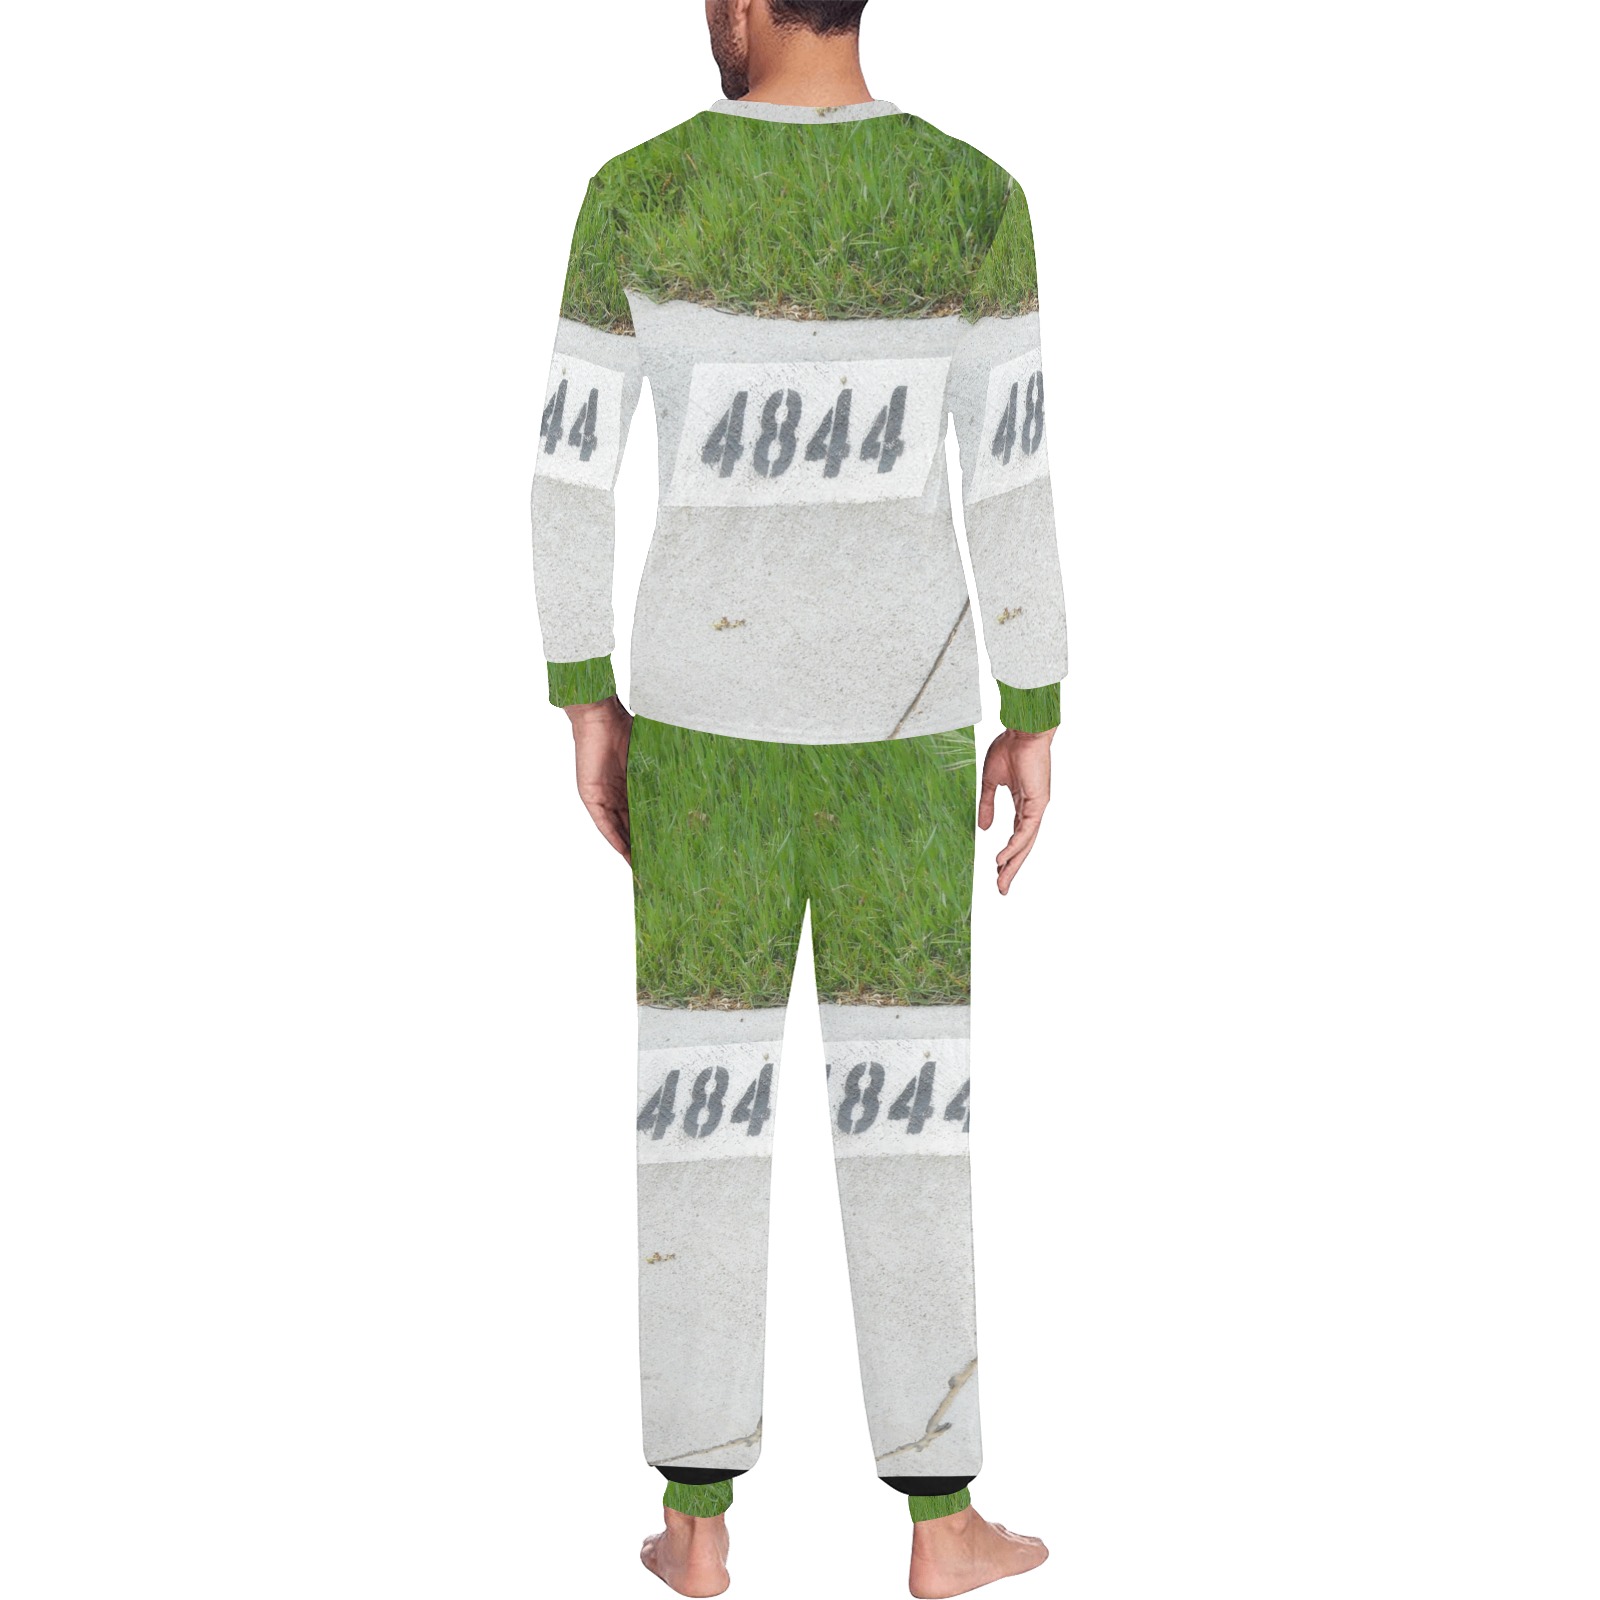 Street Number 4844 Men's All Over Print Pajama Set with Custom Cuff